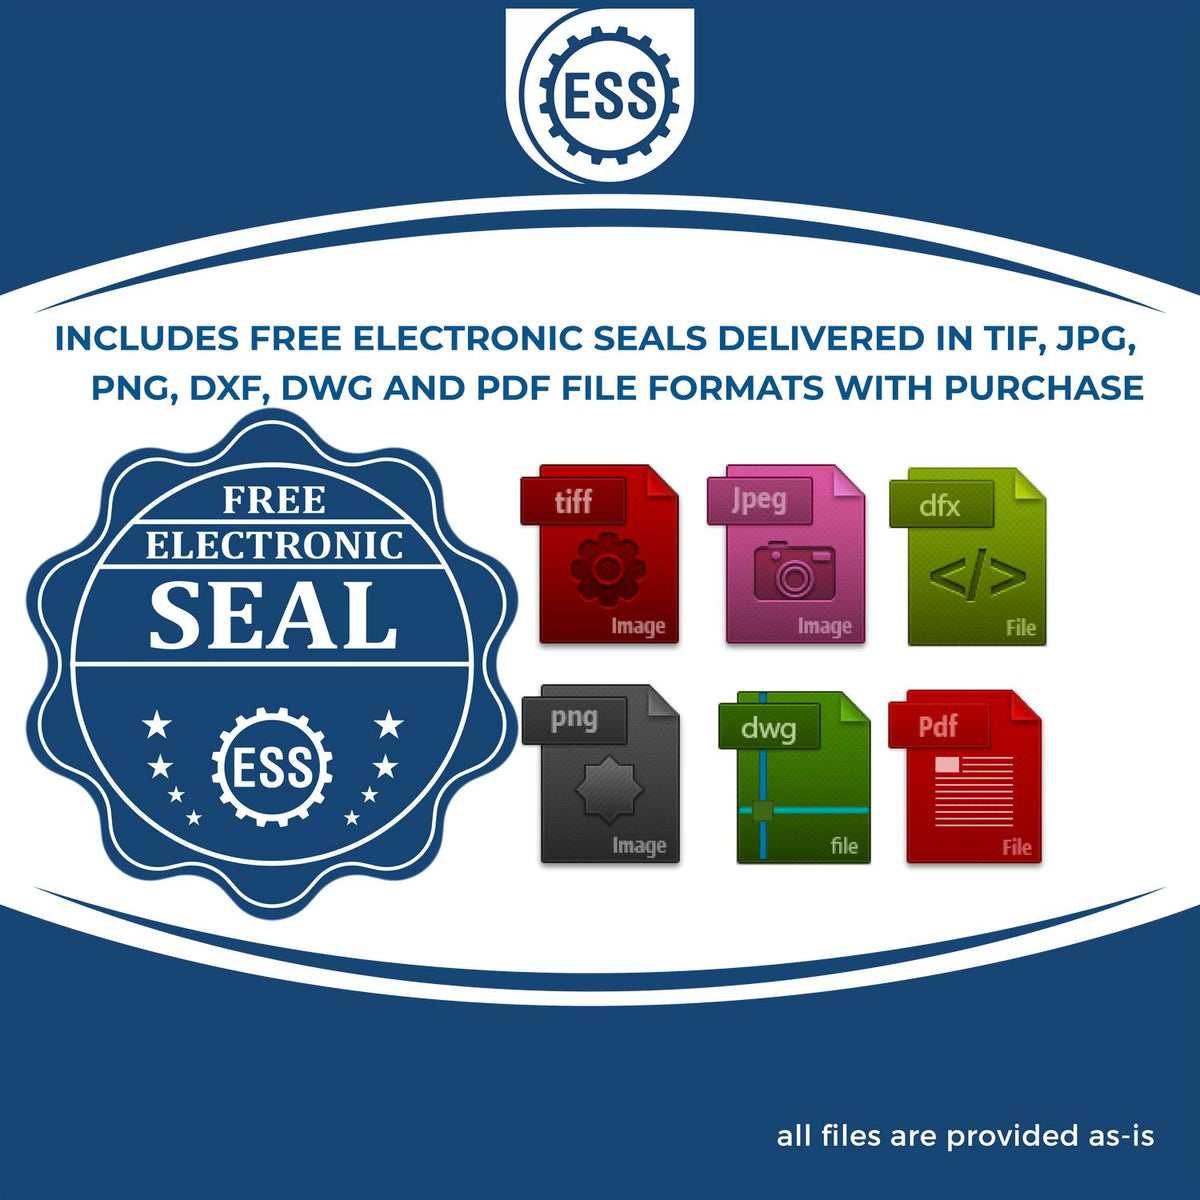 An infographic for the free electronic seal for the Slim Pre-Inked Connecticut Land Surveyor Seal Stamp illustrating the different file type icons such as DXF, DWG, TIF, JPG and PNG.